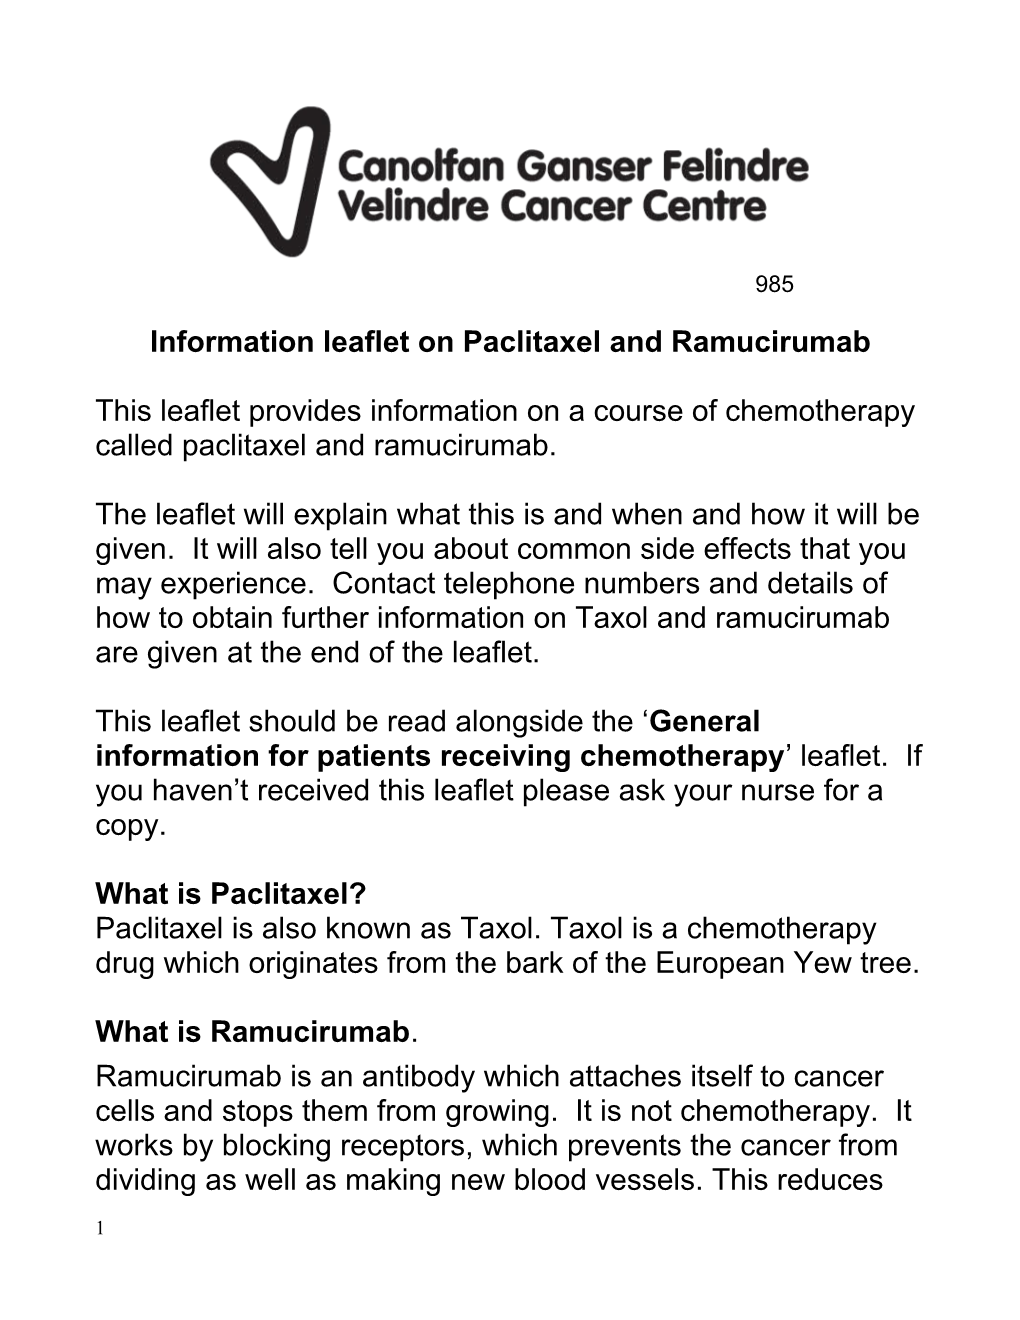 Information Leaflet on Paclitaxel and Ramucirumab